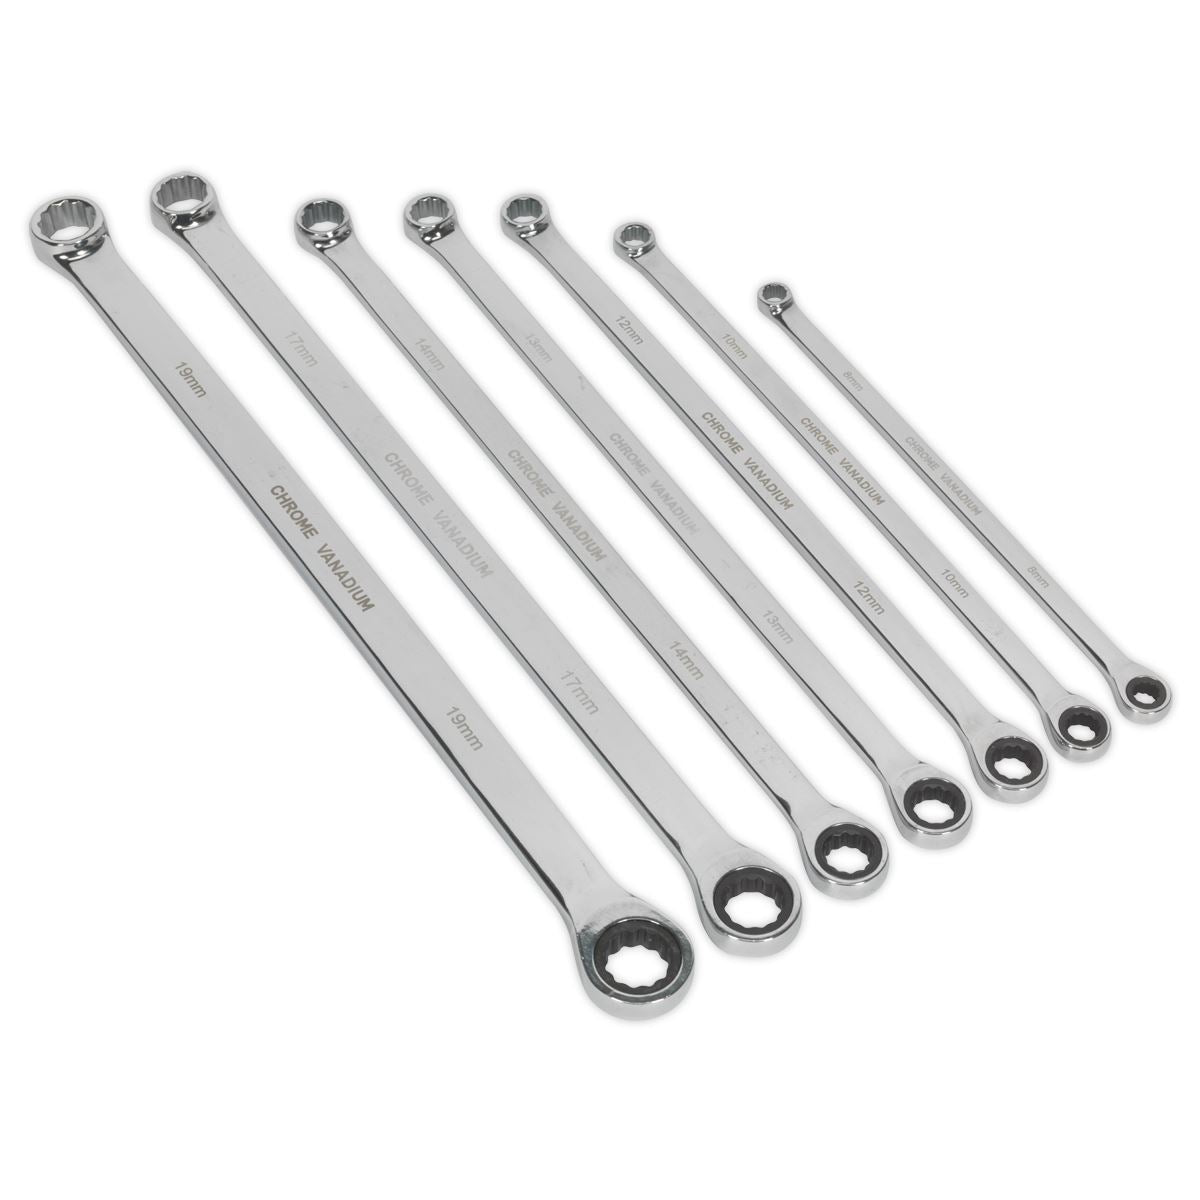 Sealey Premier Double Ring Ratchet/Fixed Spanner Set 7pc Extra-Long Metric